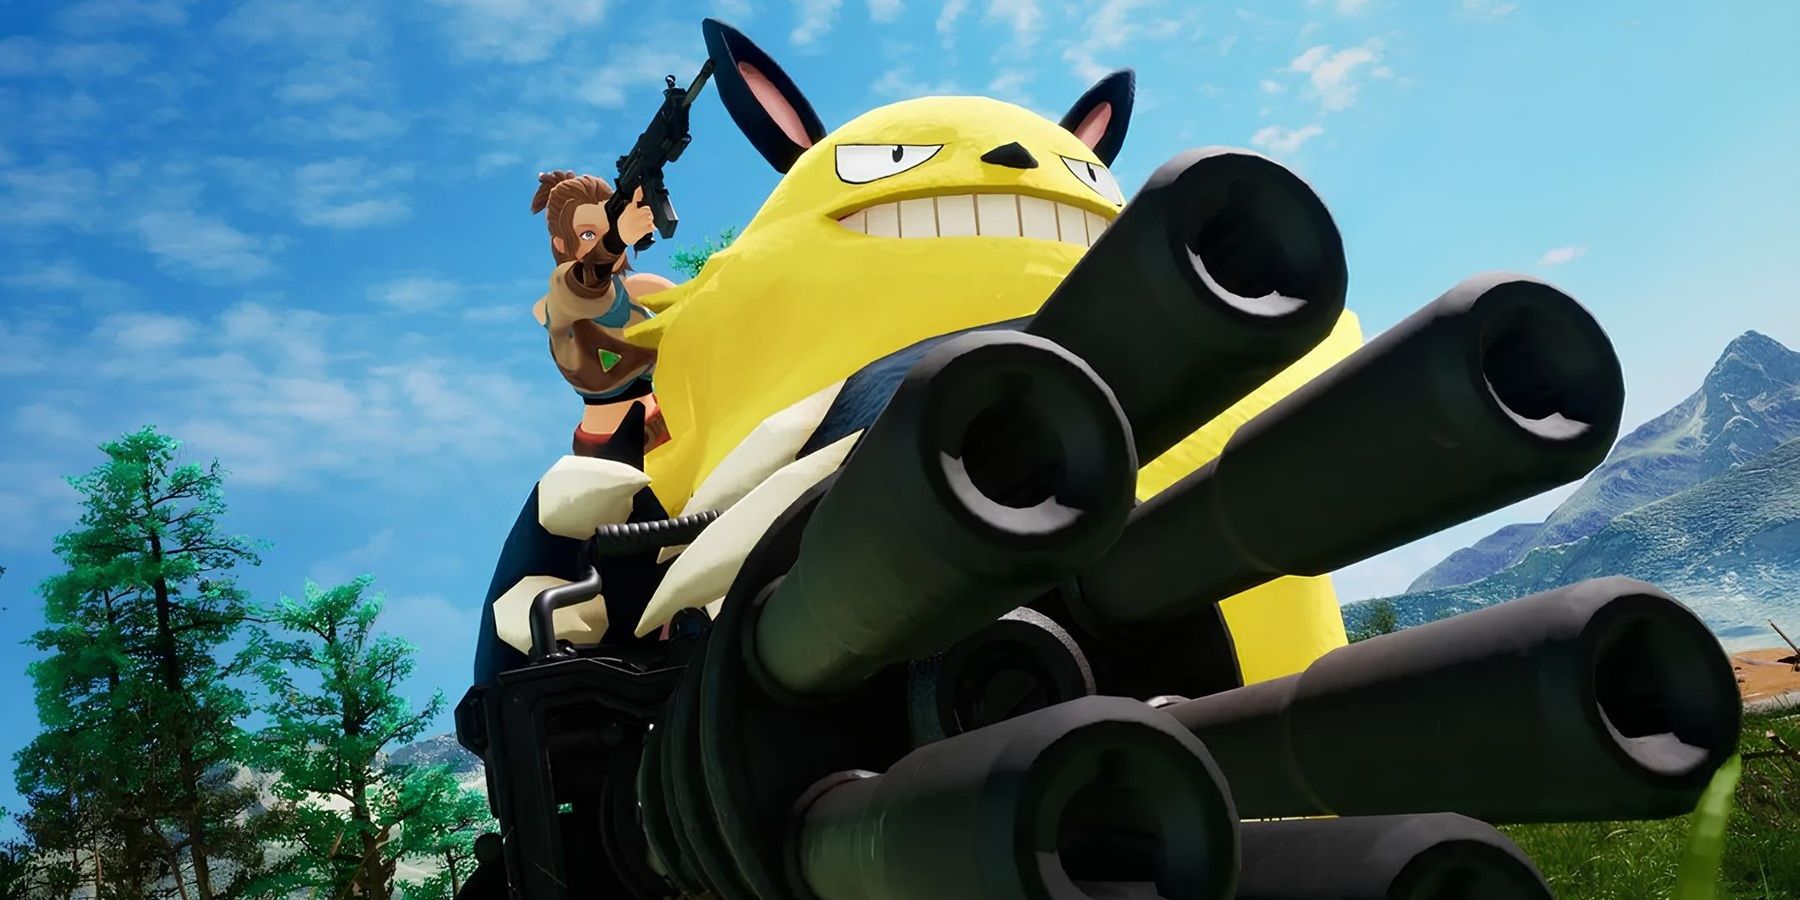 Gun-toting Pokemon game aims to top Steam charts